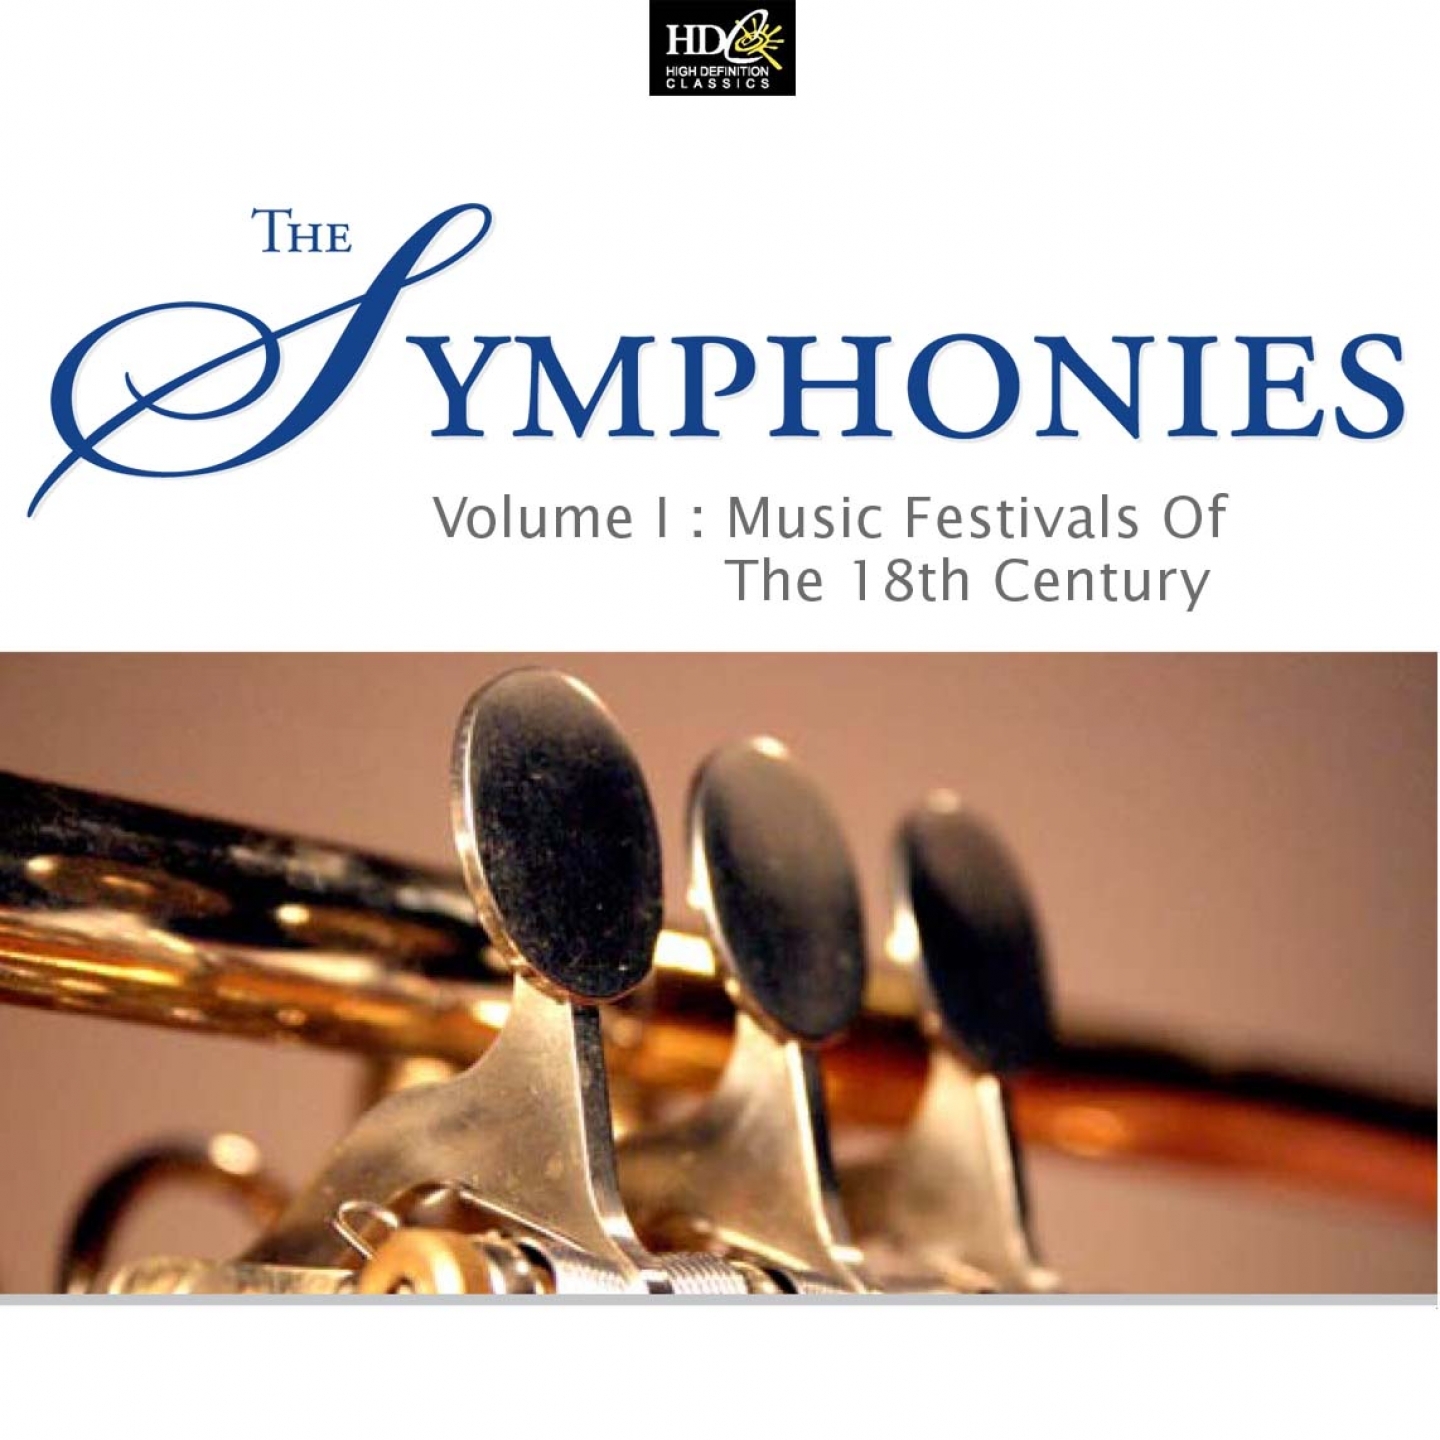 The Symphonies Vol. 1: Music Festivals Of The 18th Century